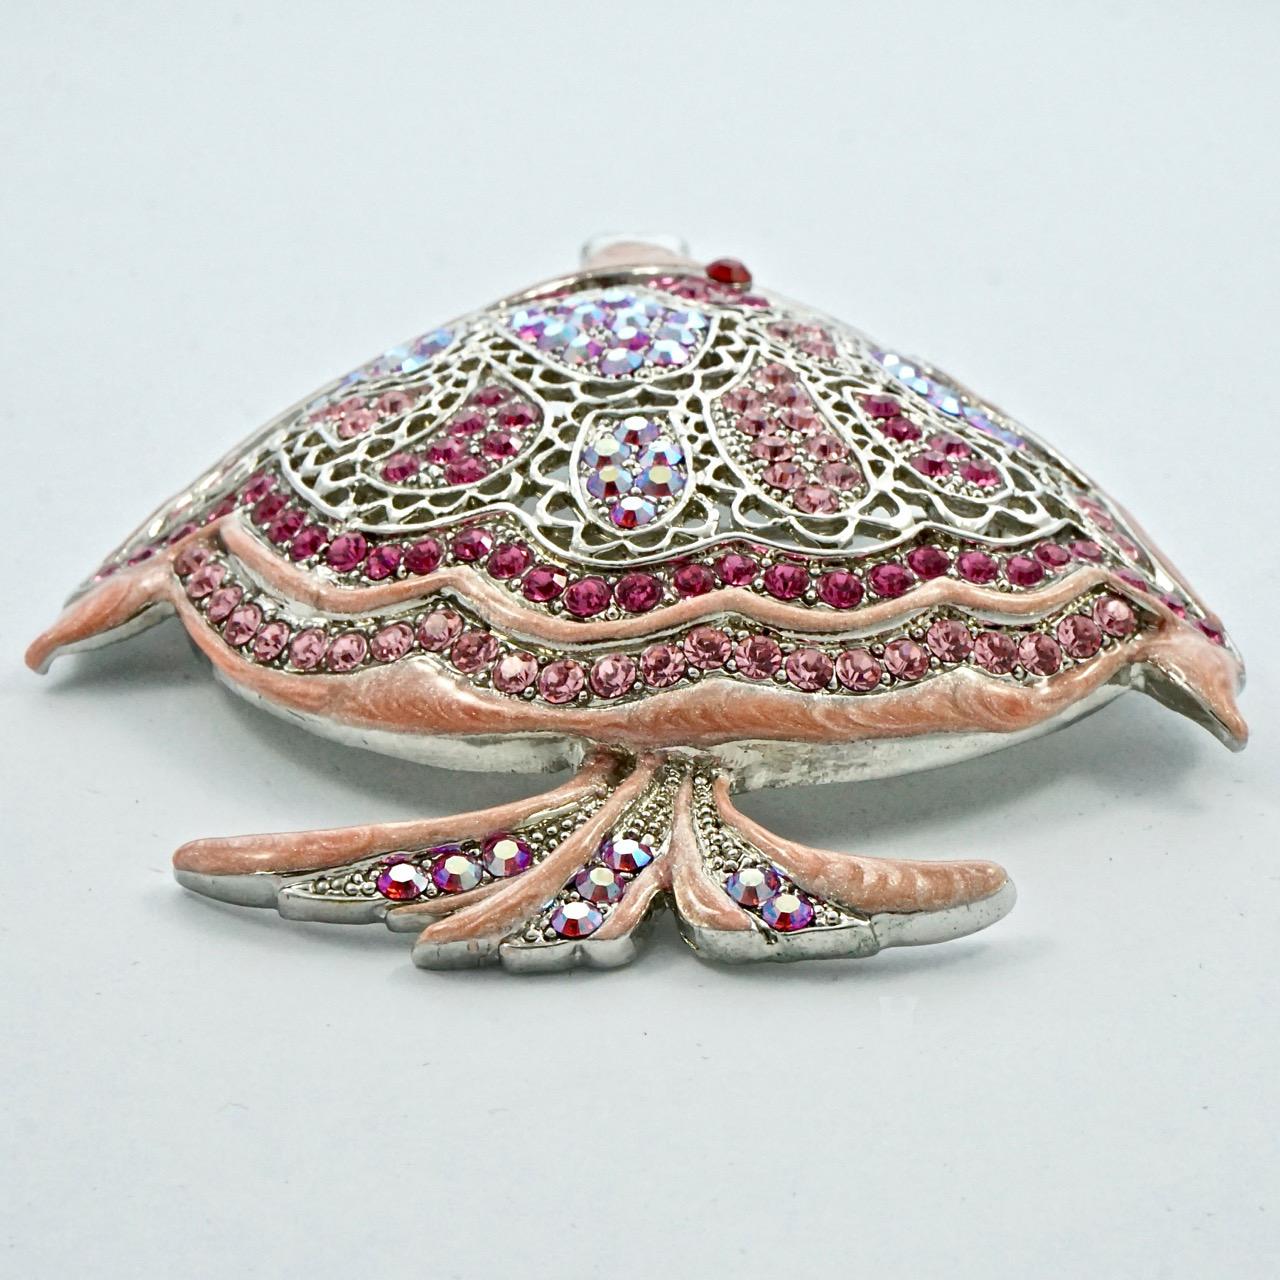 MD Silver Tone Fish Statement Brooch with Pink Enamel and Pink Rhinestones For Sale 1